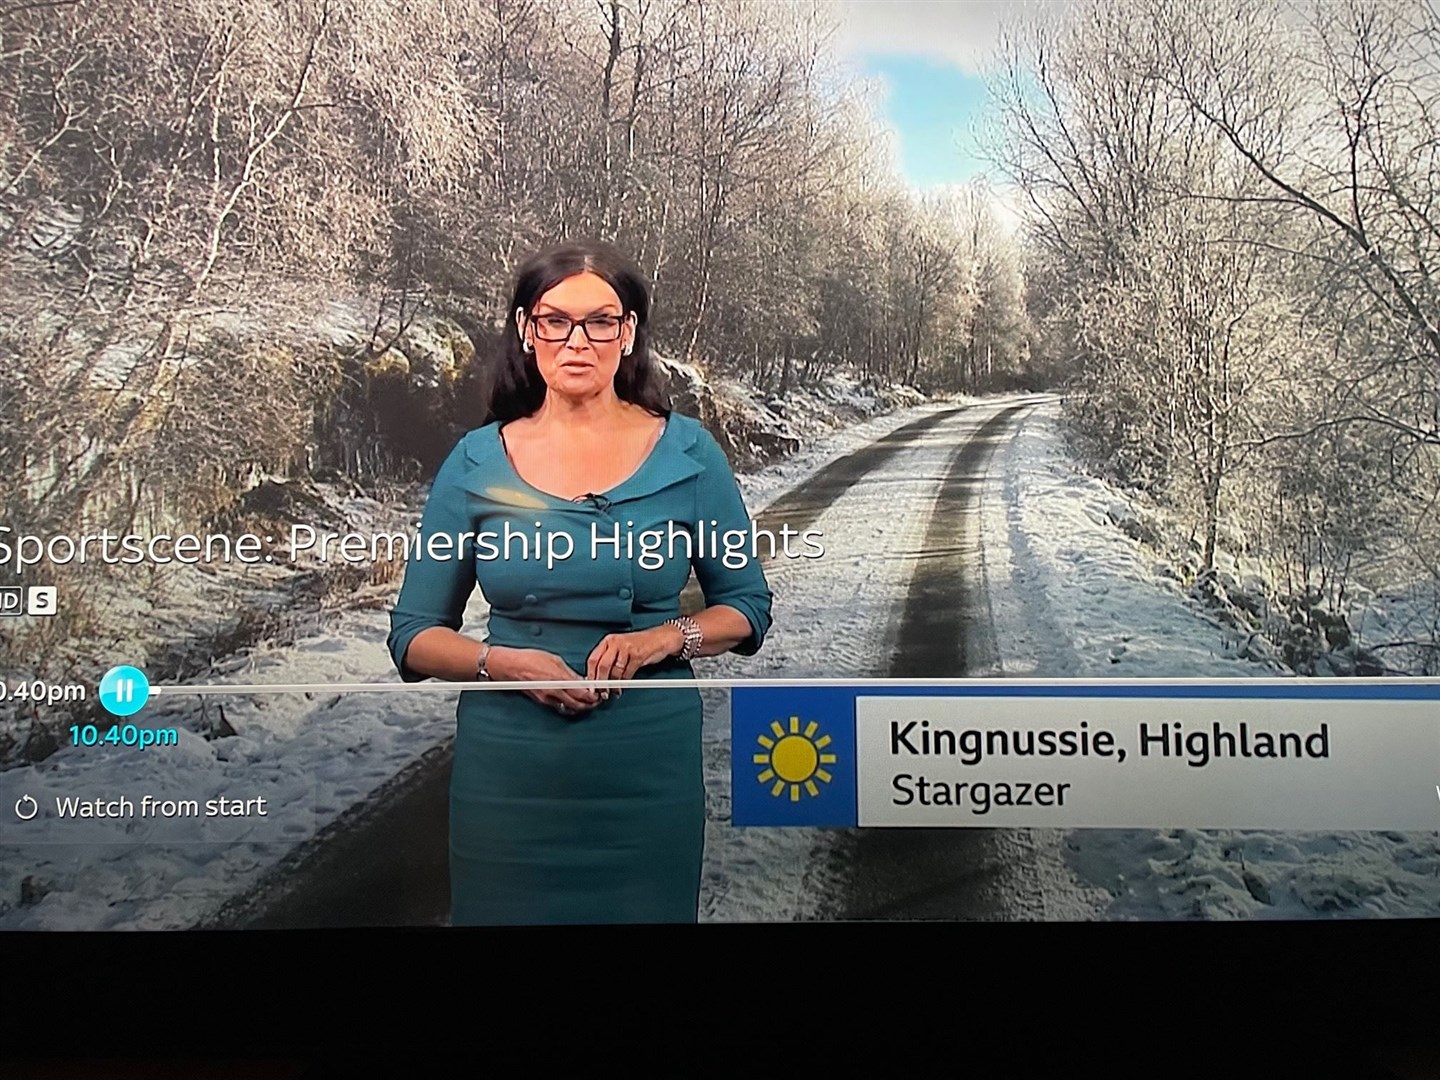 BBC weather forecaster Judith Ralston with the image depicting 'Kingnussie'.